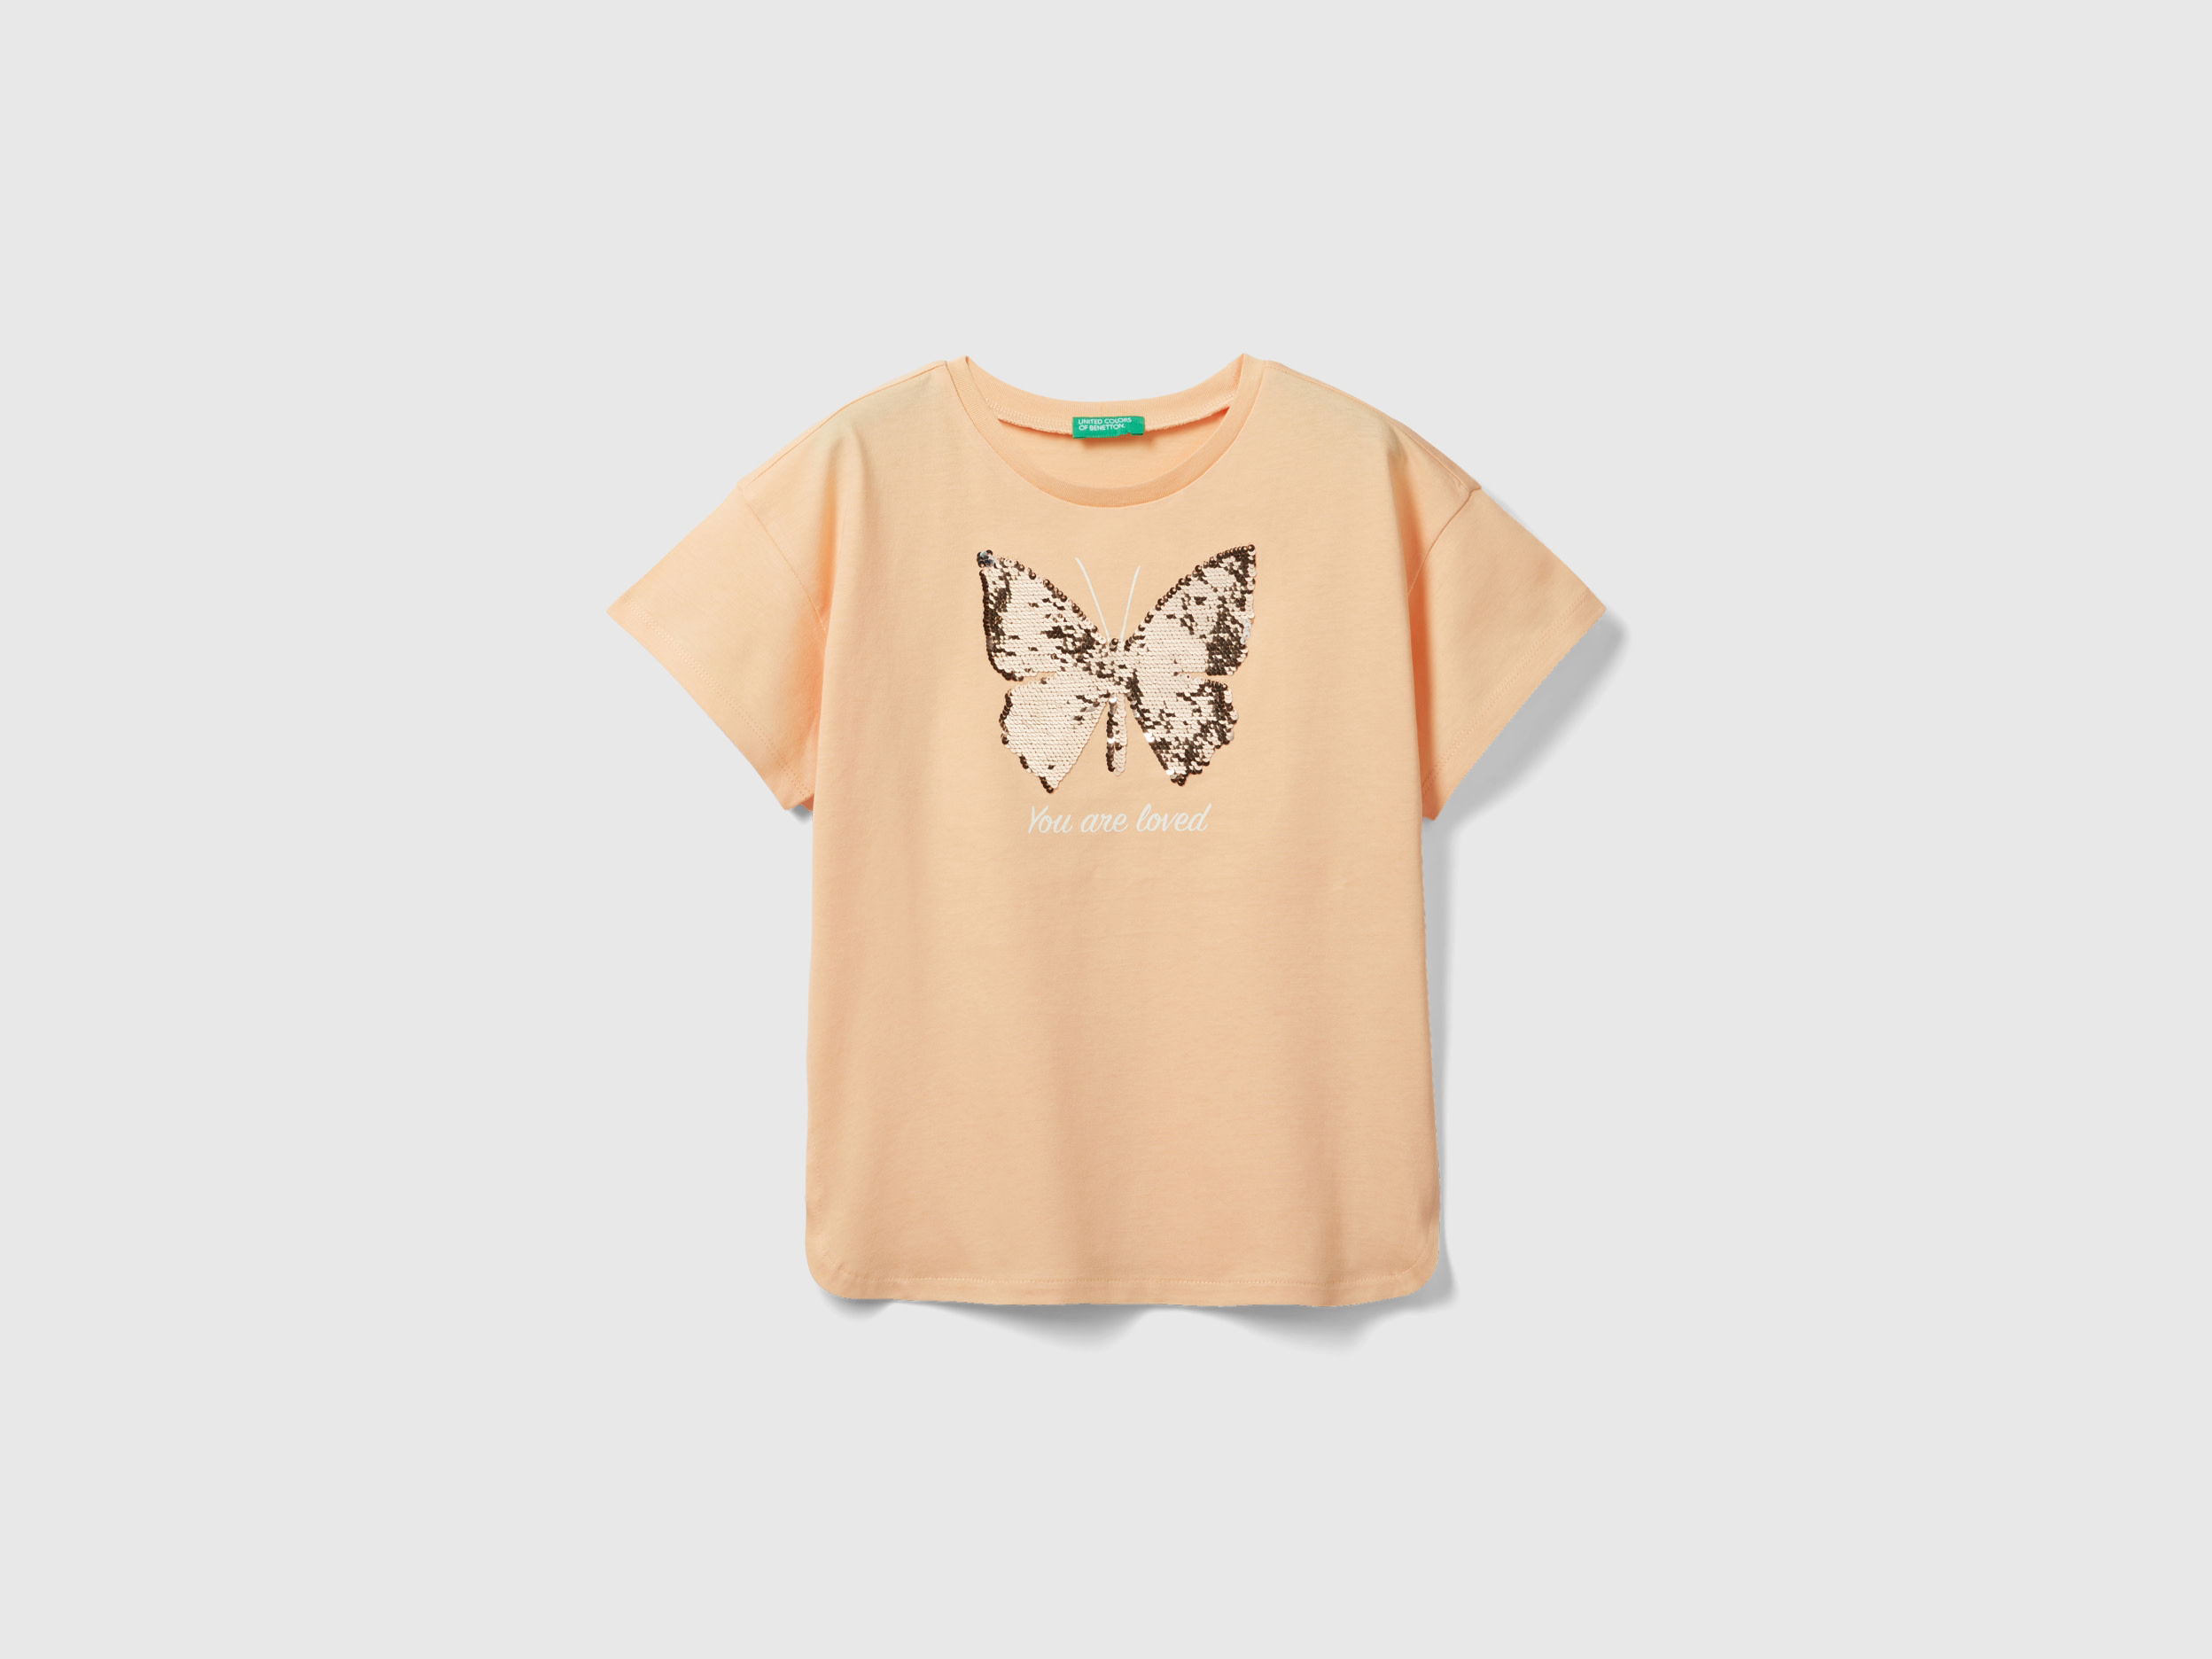 Image of Benetton, T-shirt With Reversible Sequins, size L, Peach, Kids